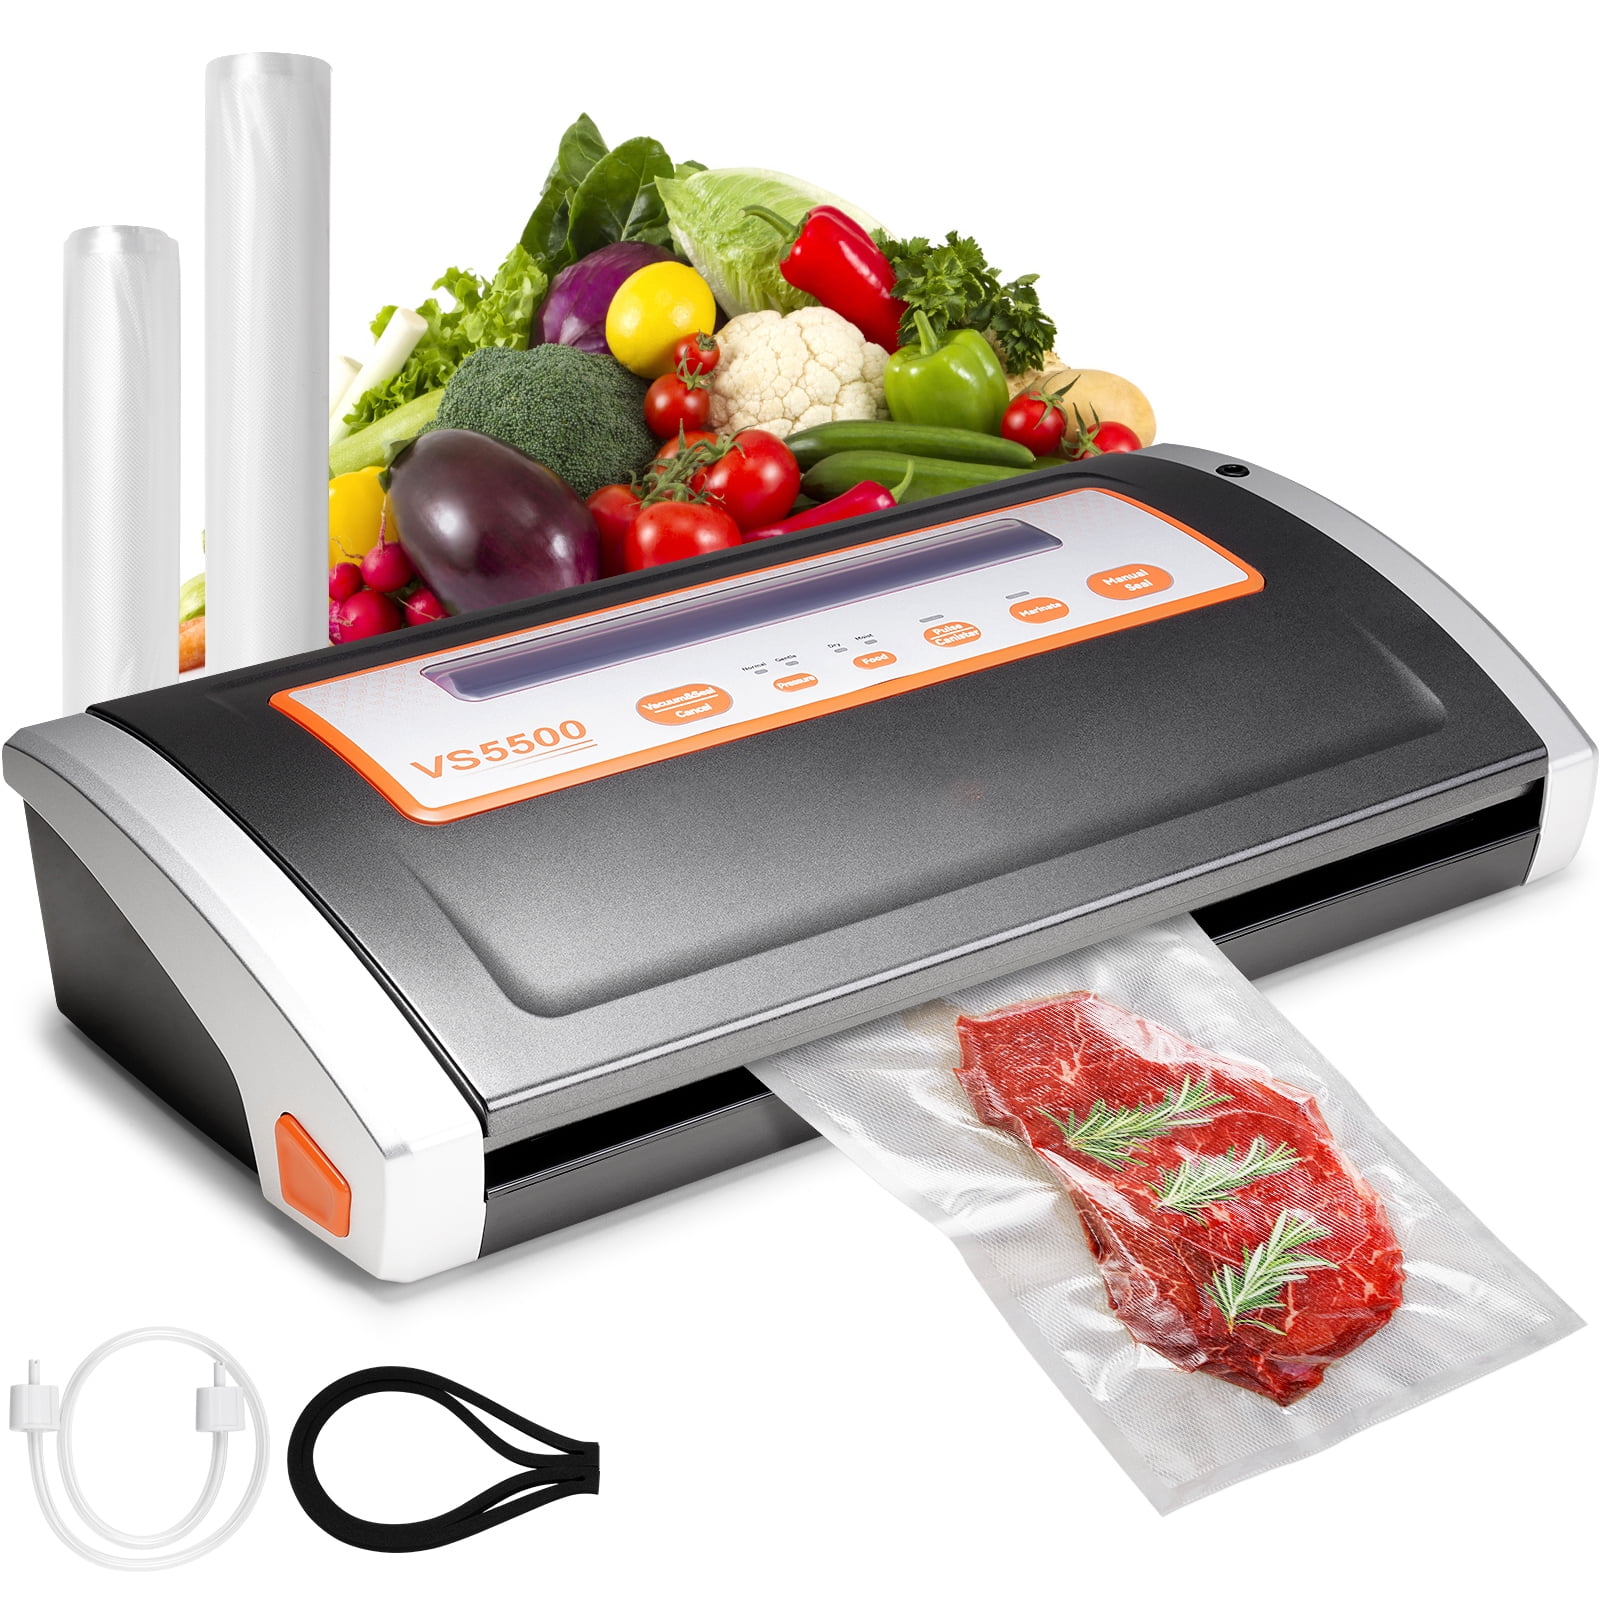  Bemkop Kitchen Vacuum Sealer Machine,Automatic Food Vacuum  Sealer with Moist/Dry Modes for Food Storage and Sous Vide (AP-18): Home &  Kitchen